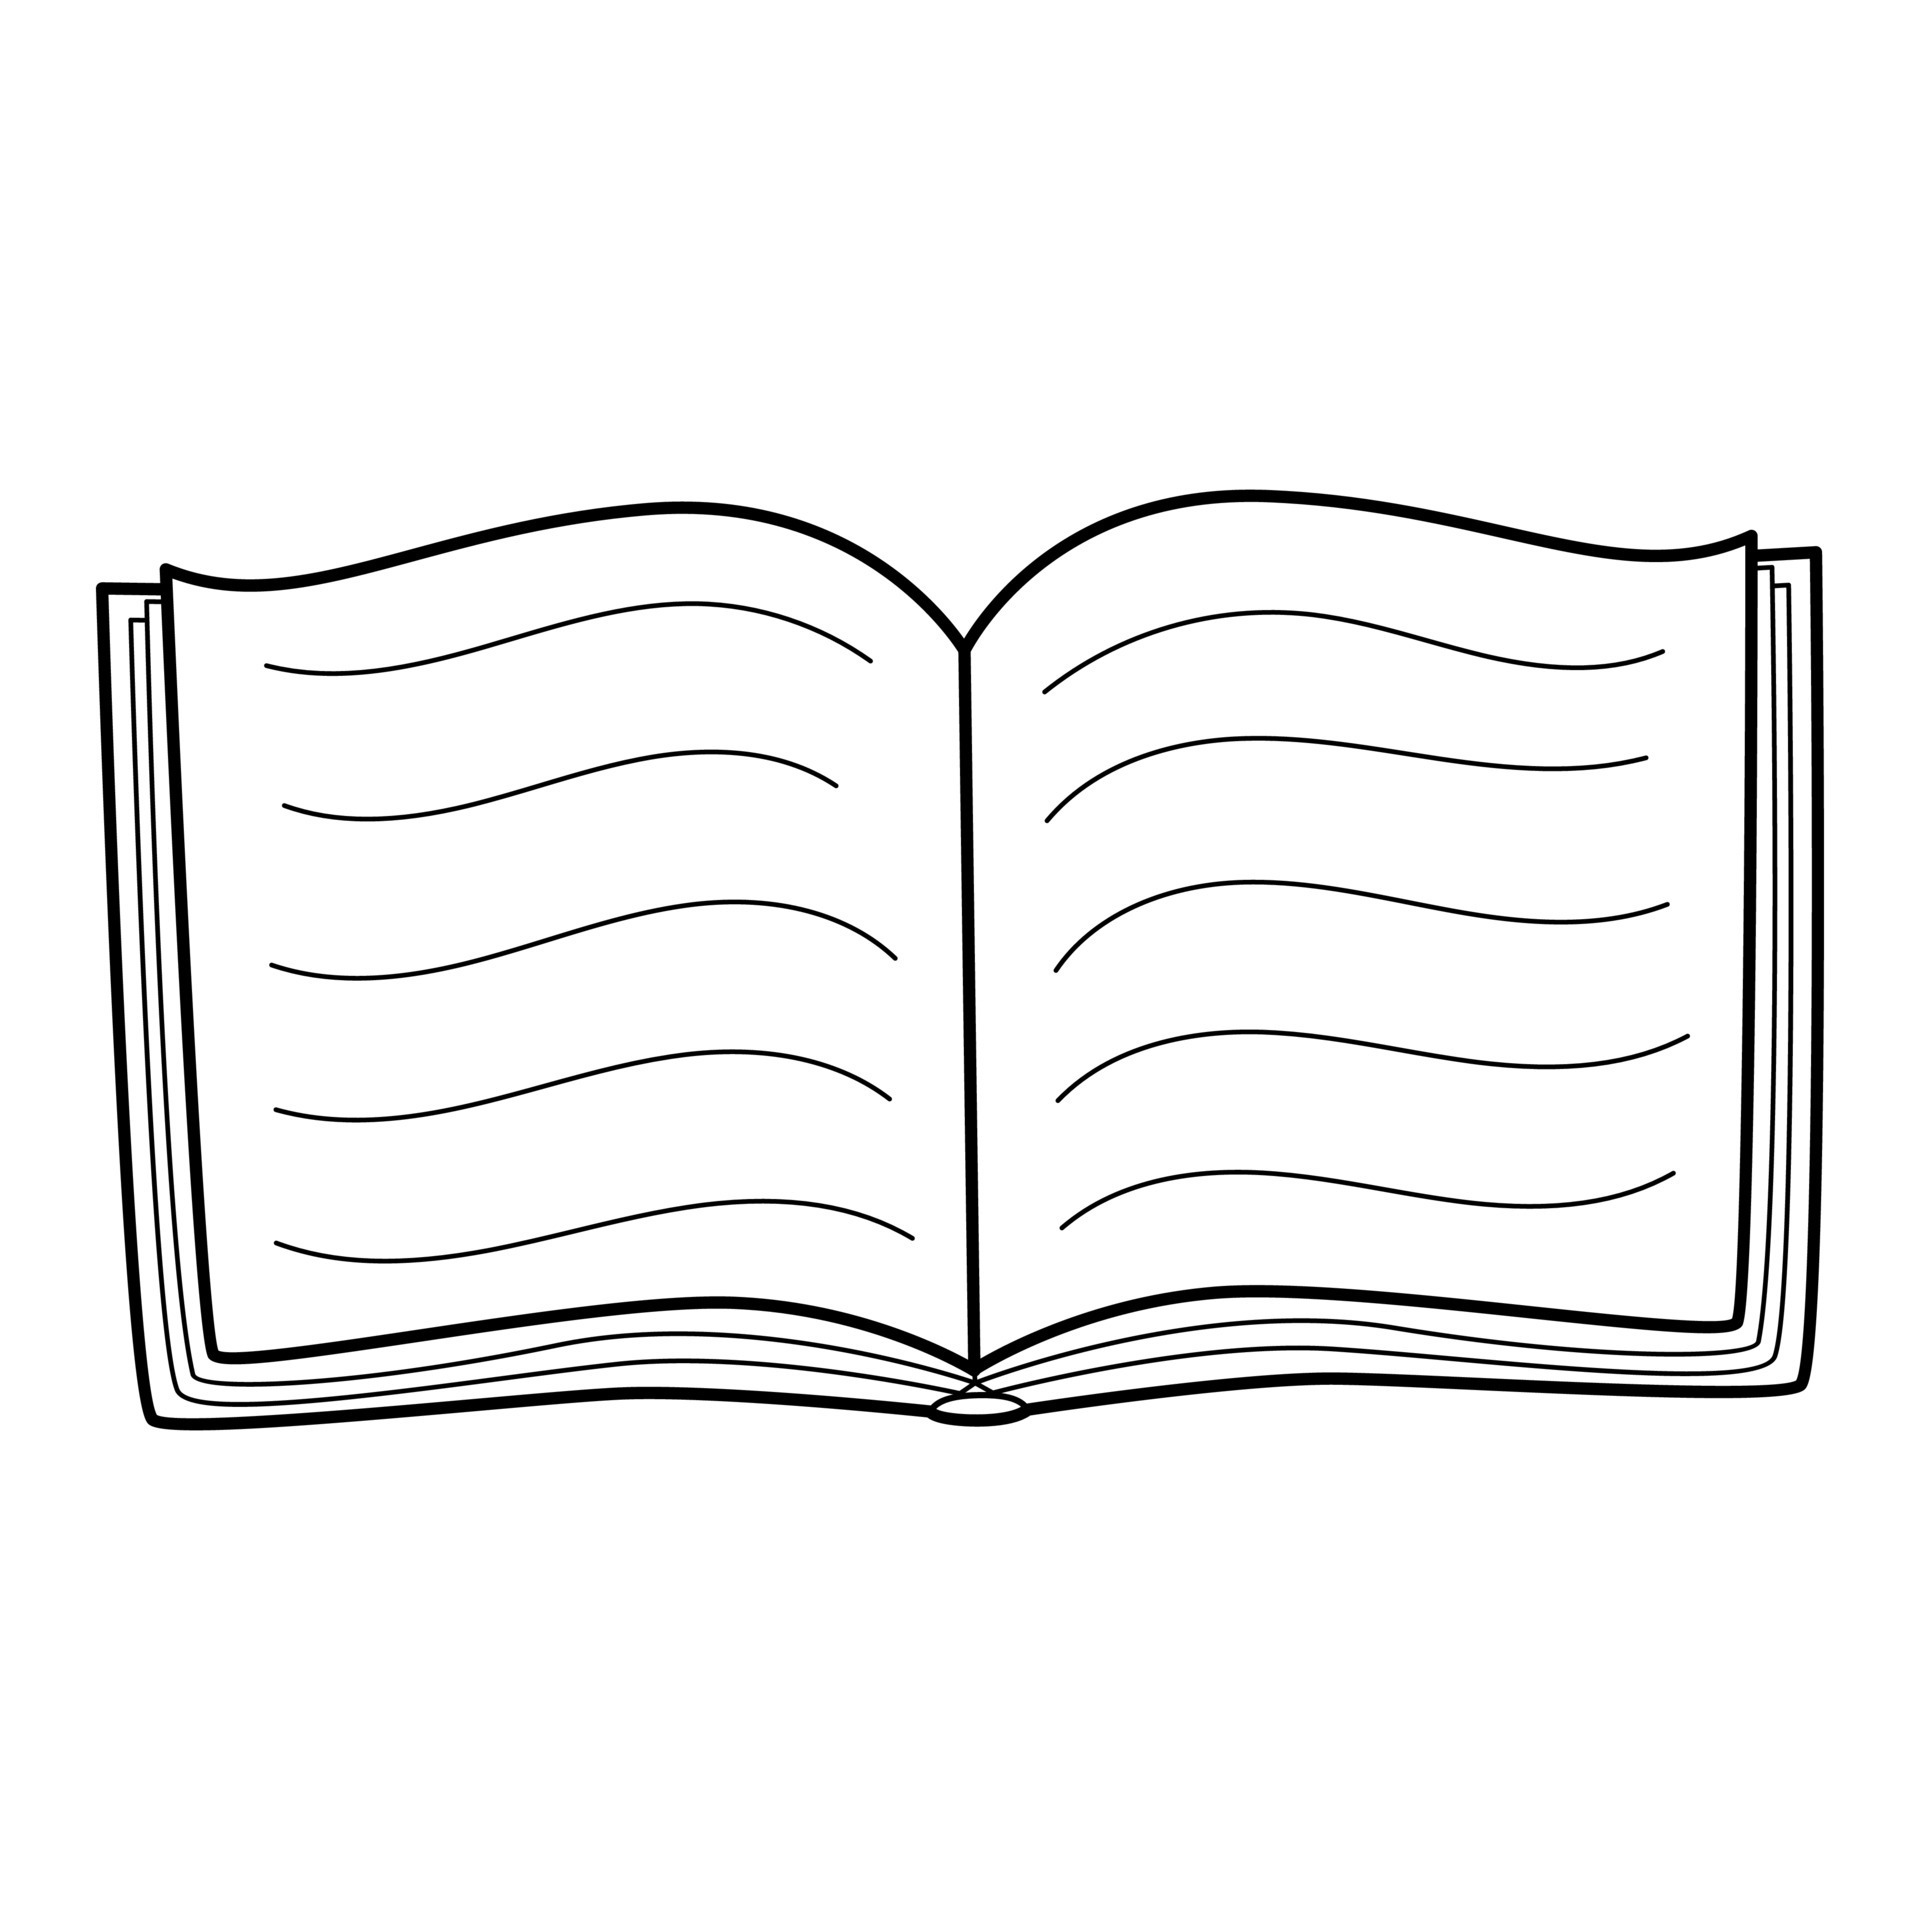 Outline doodle open book. A symbol of learning, education